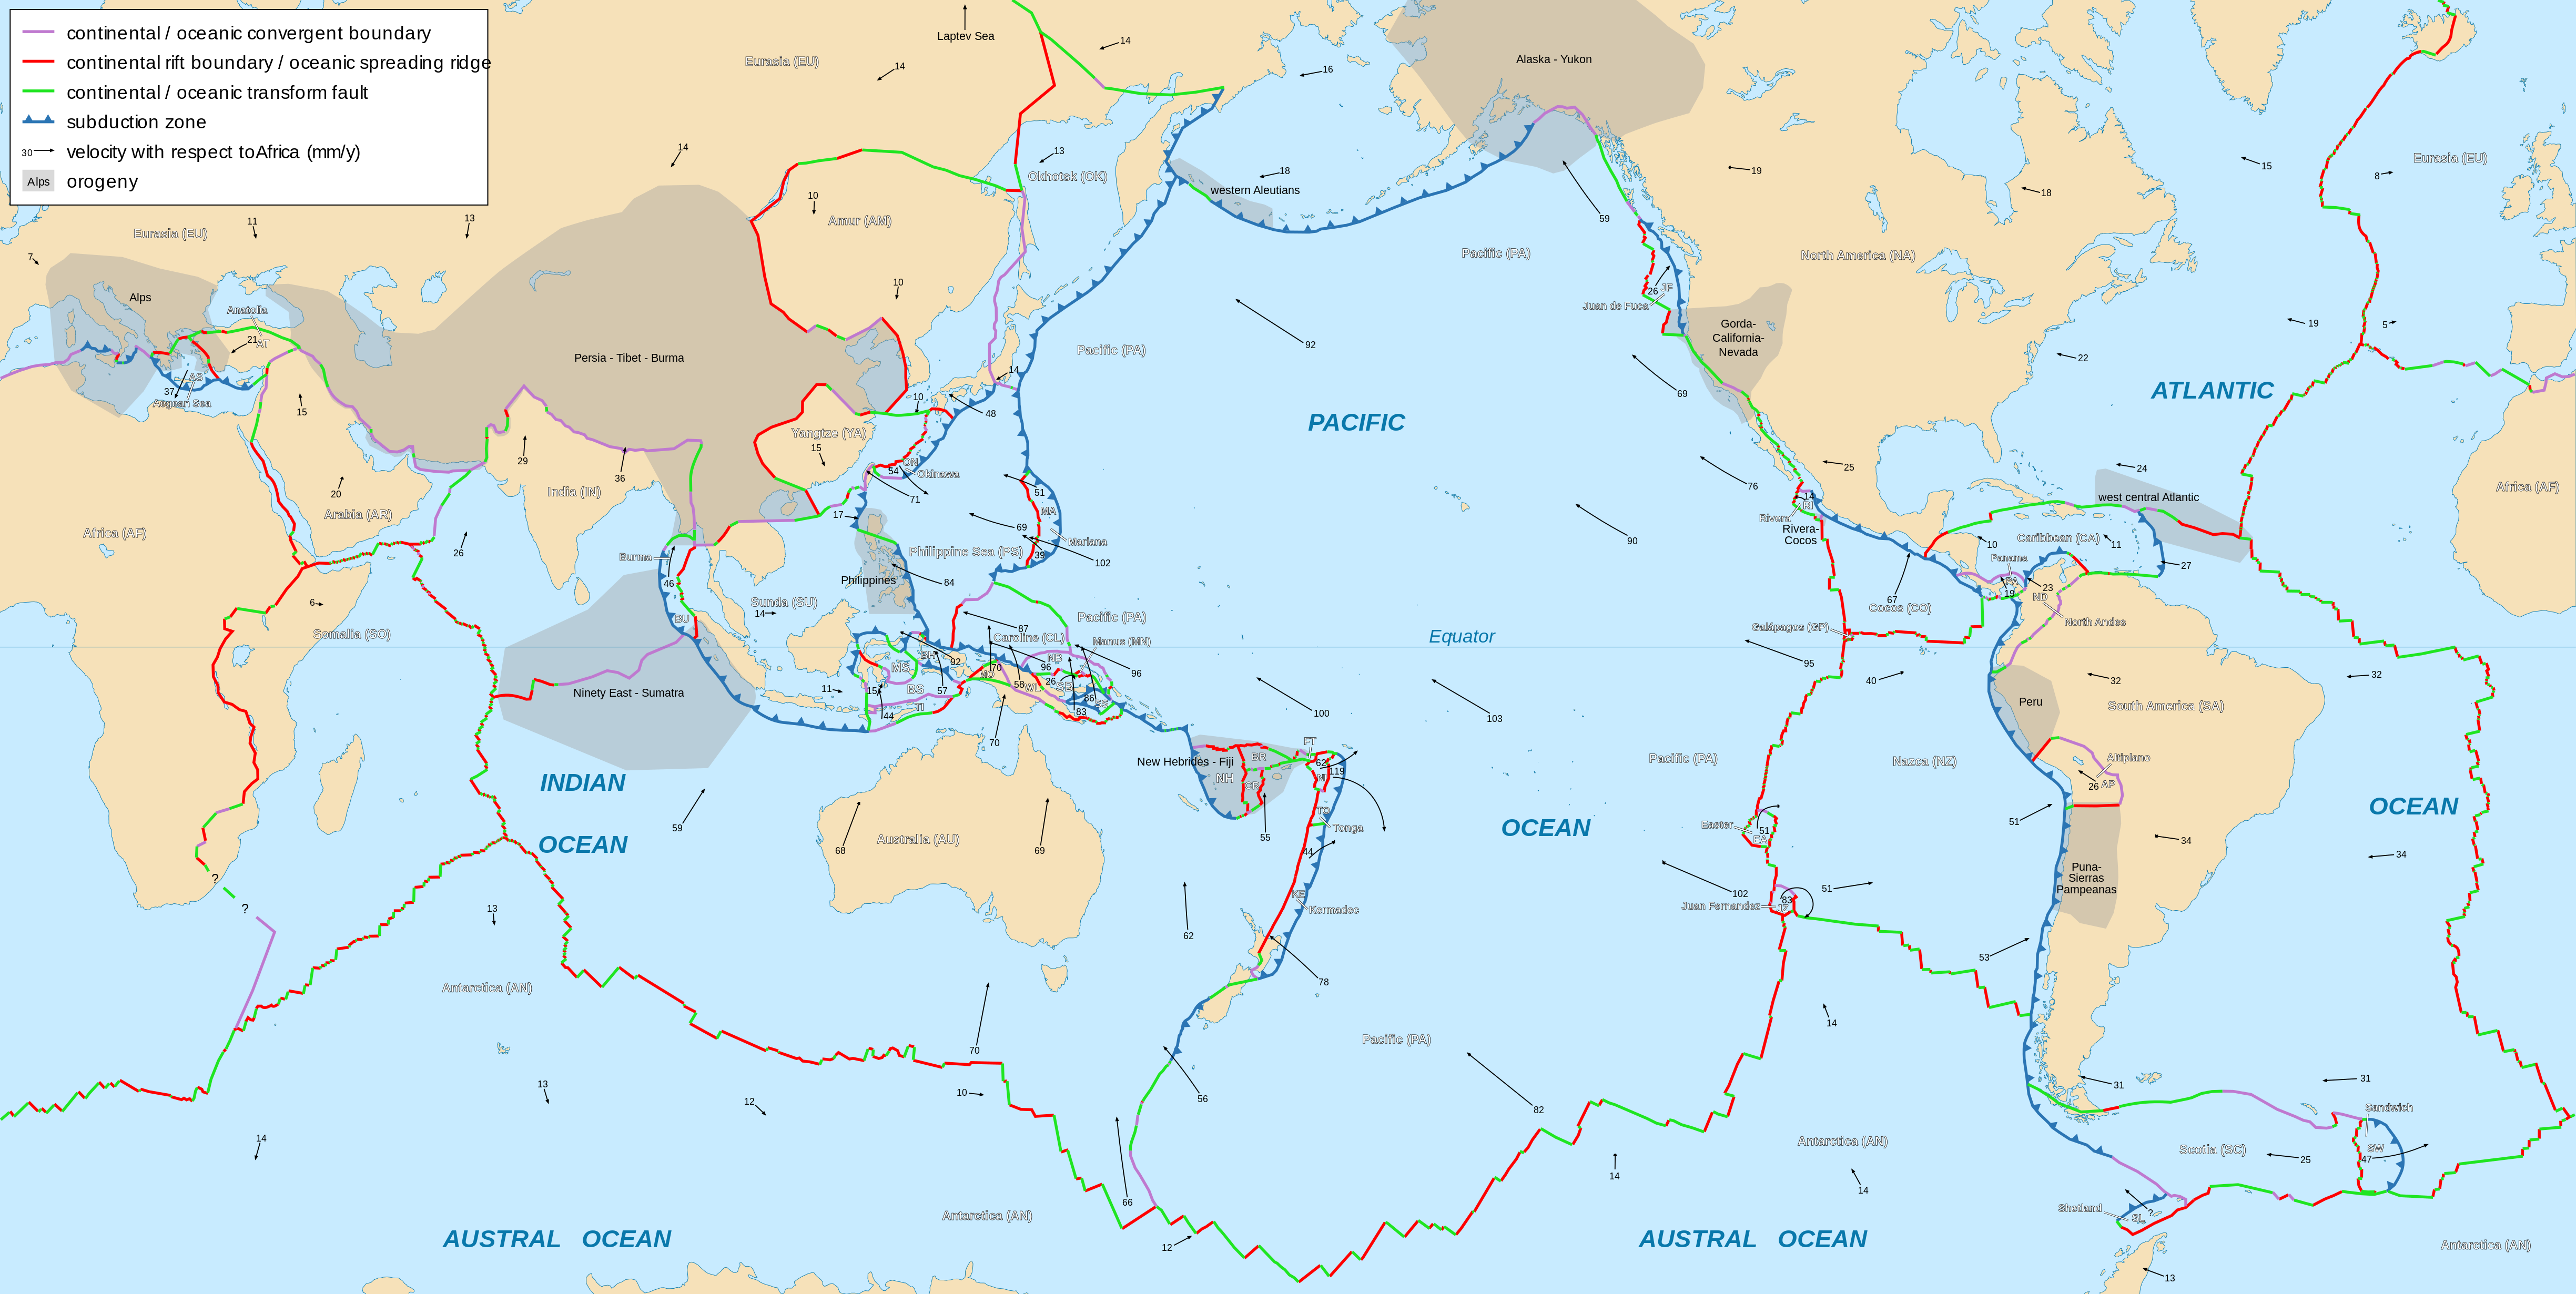 World map with Pacific Ocean centered in the middle. Numerous tectonic plates are color-coded by outline: lavender outlines convergent boundaries, red outlines divergent boundaries, green outlines transform boundaries, and blue with triangles outlines subduction zones. The cardinal direction of plate movements are shown by small black arrows that are labeled with a number in millimeters per year.